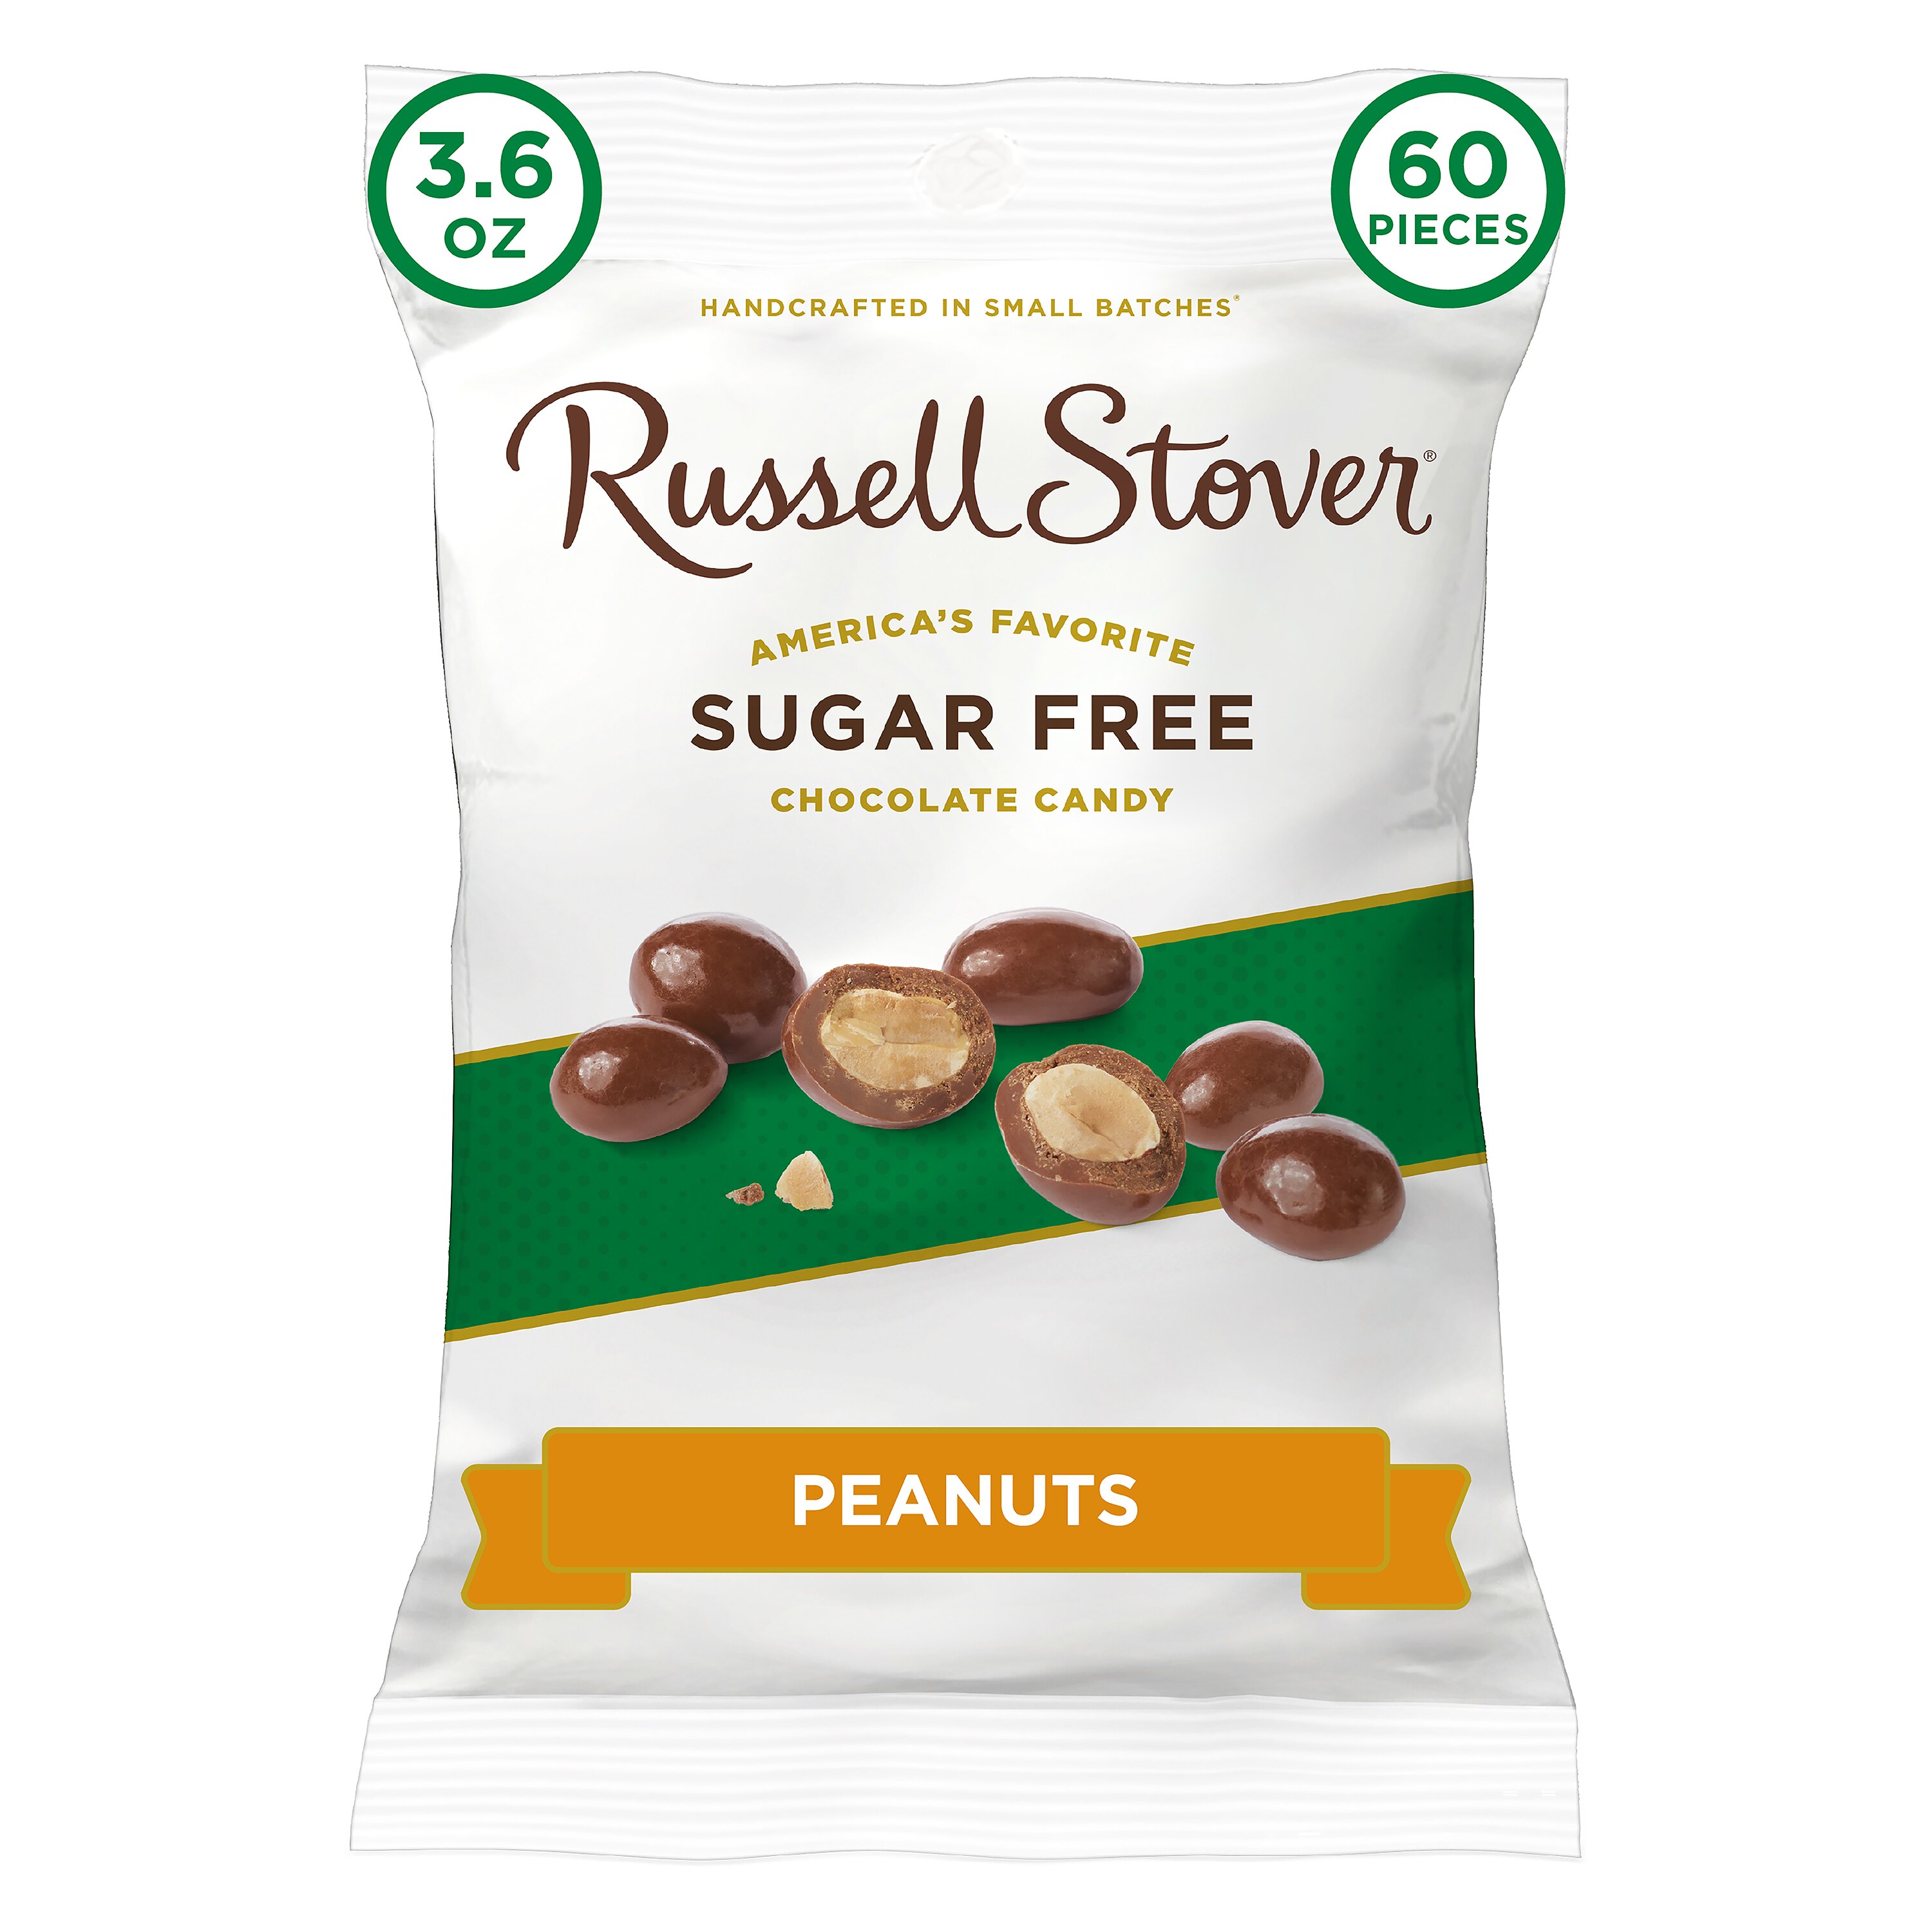 Russell Stover Sugar Free Chocolate Candy Covered Peanuts with Stevia, 3.6 OZ